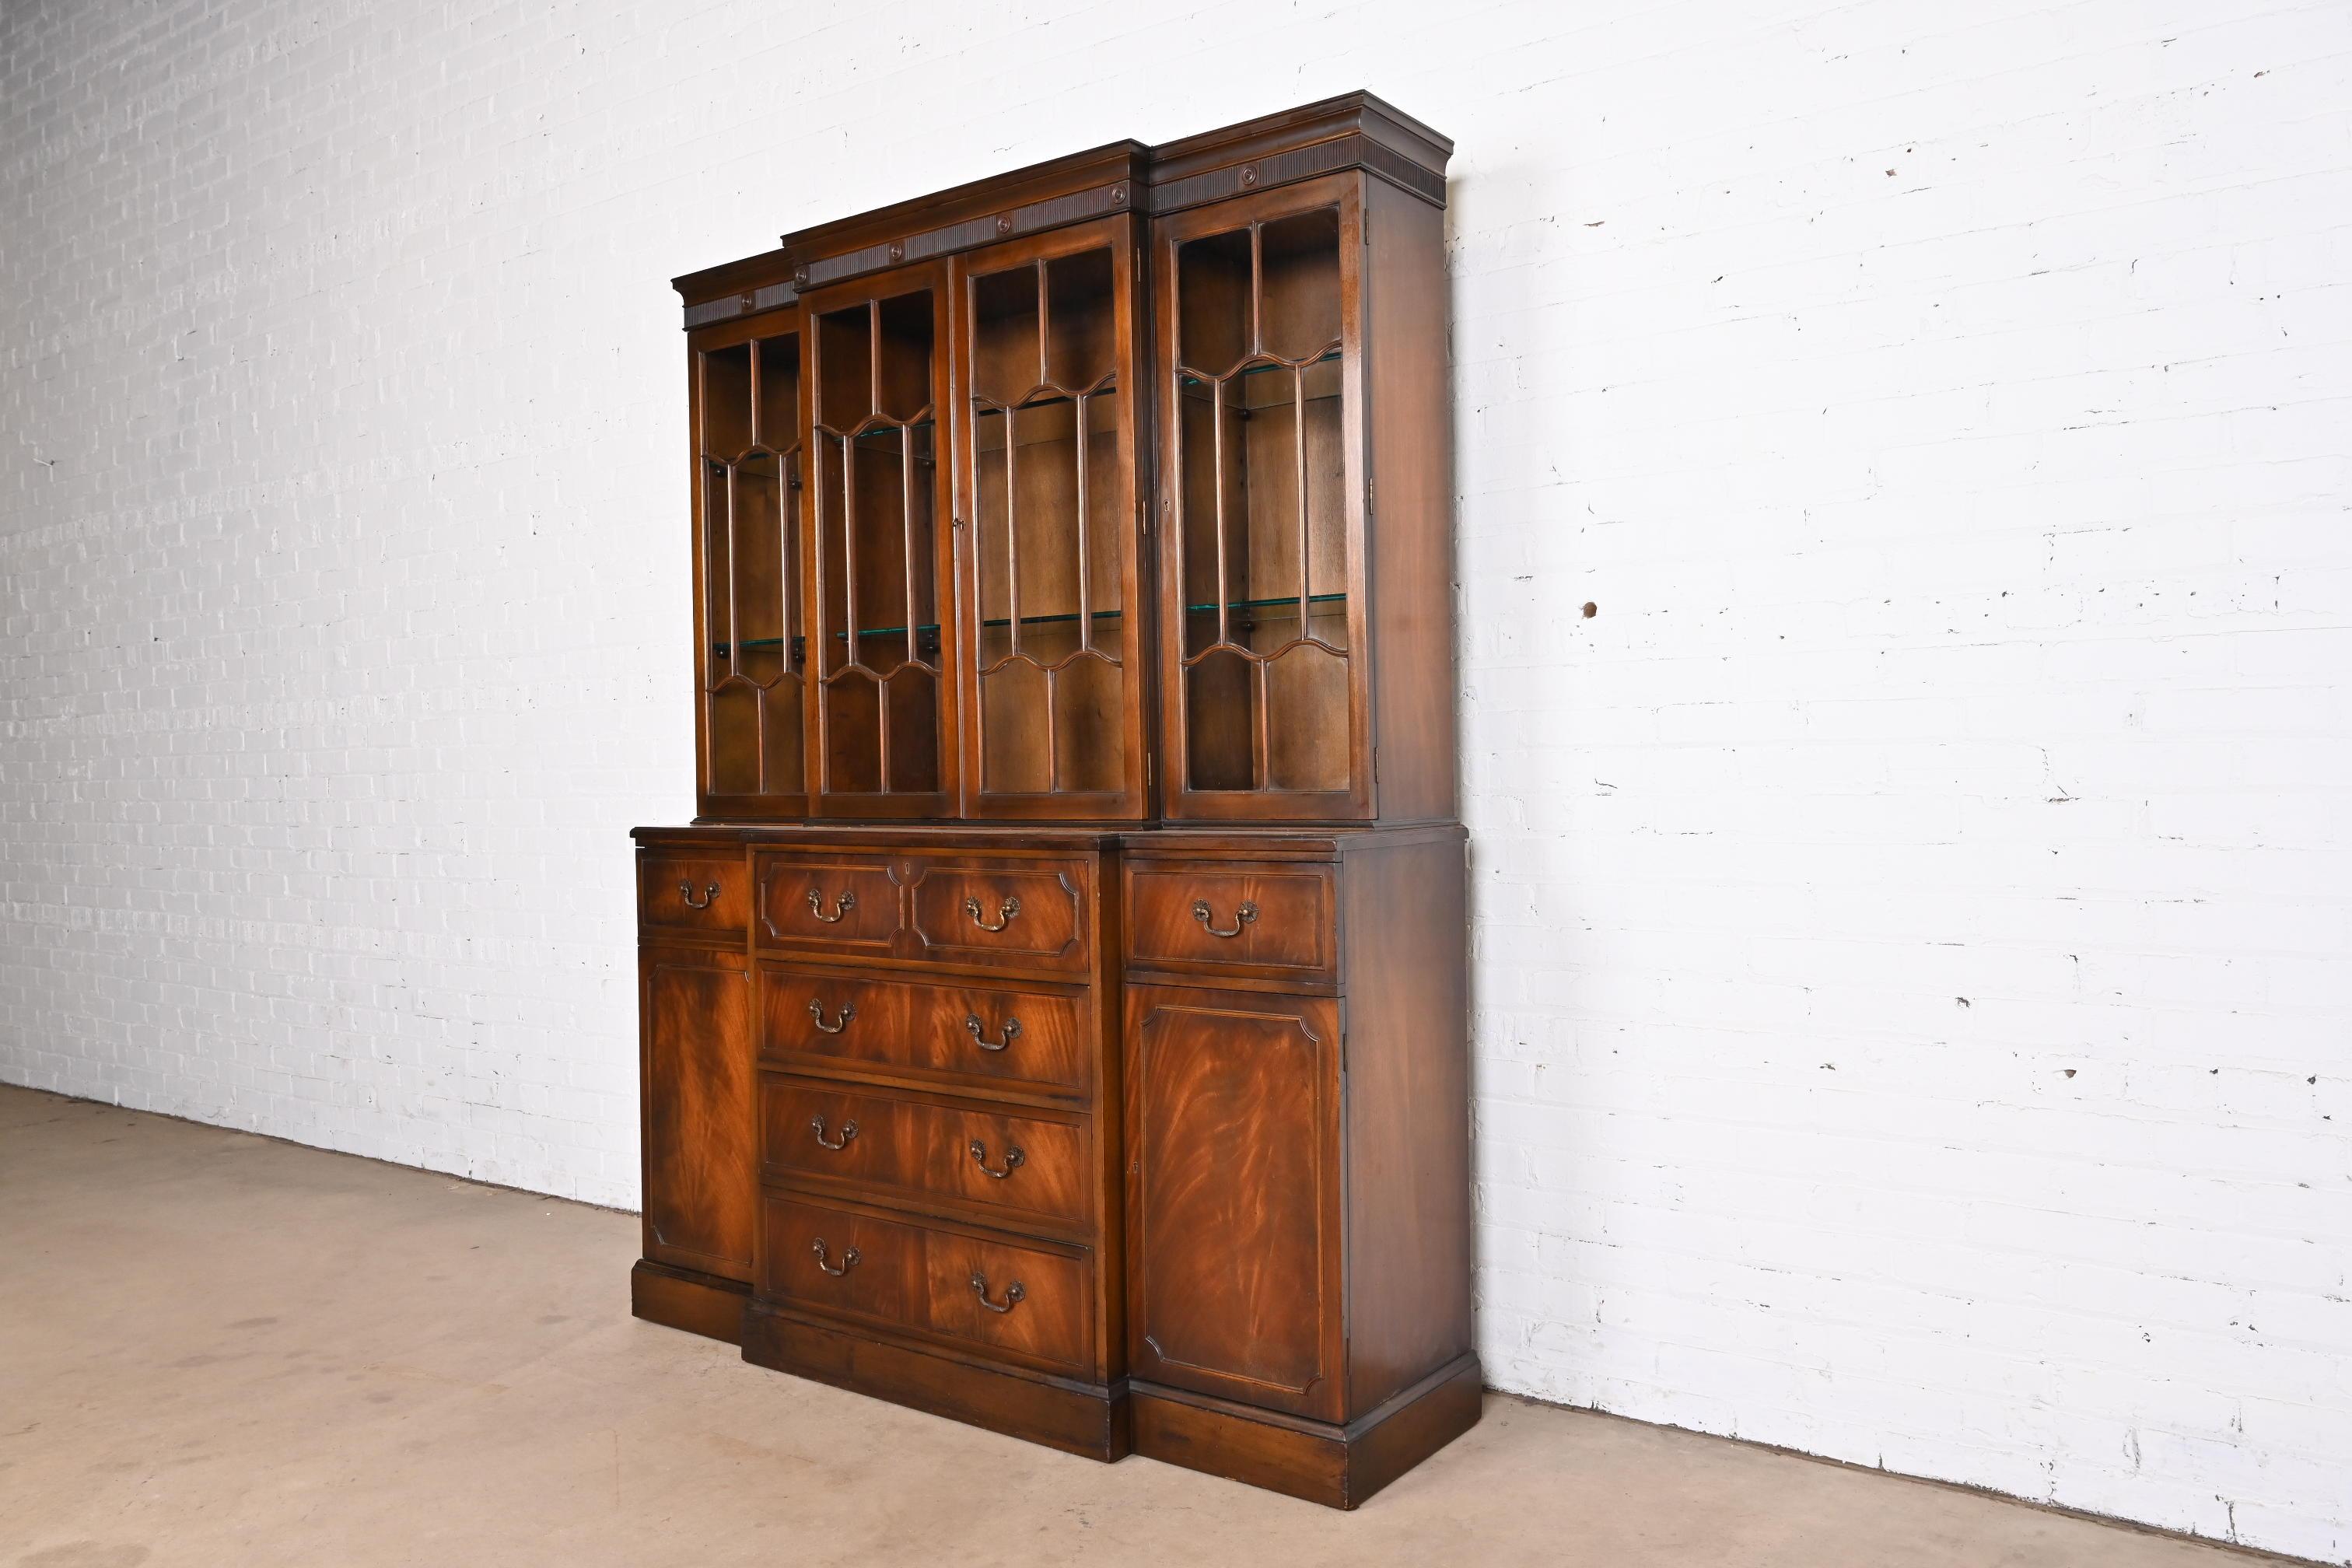 A gorgeous Georgian or Chippendale style breakfront bookcase or dining cabinet

In the manner of Baker Furniture

By Frederick Tibbenham

England, circa 1930s

Carved flame mahogany, with mullioned glass front doors, original brass hardware,